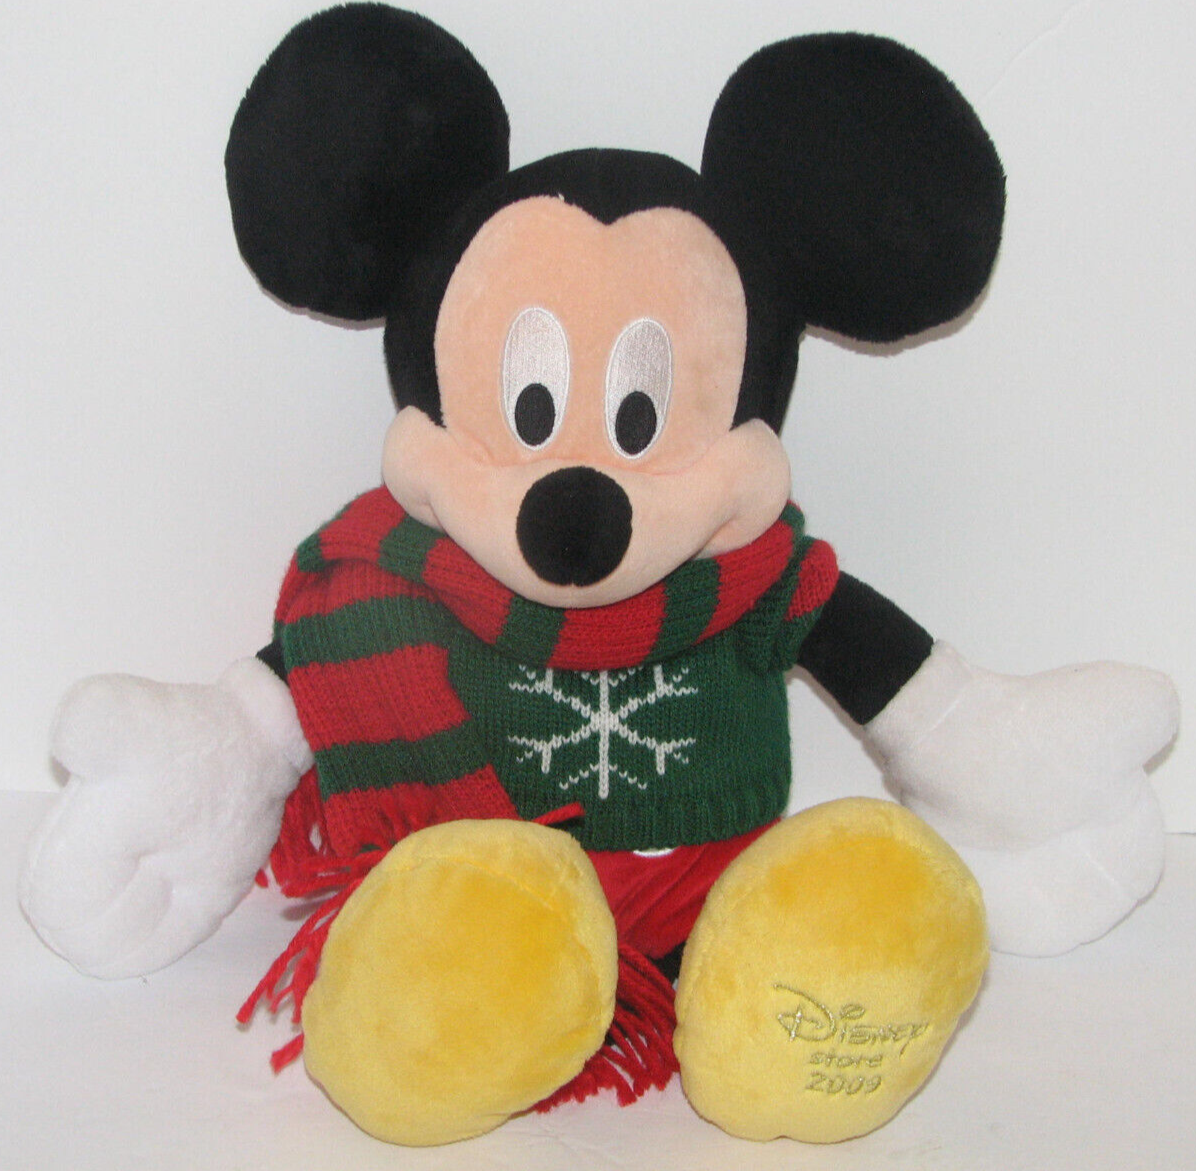 The Disney Store Minnie Mouse Winter Theme 2009 Sweater & Scarf - $19.78